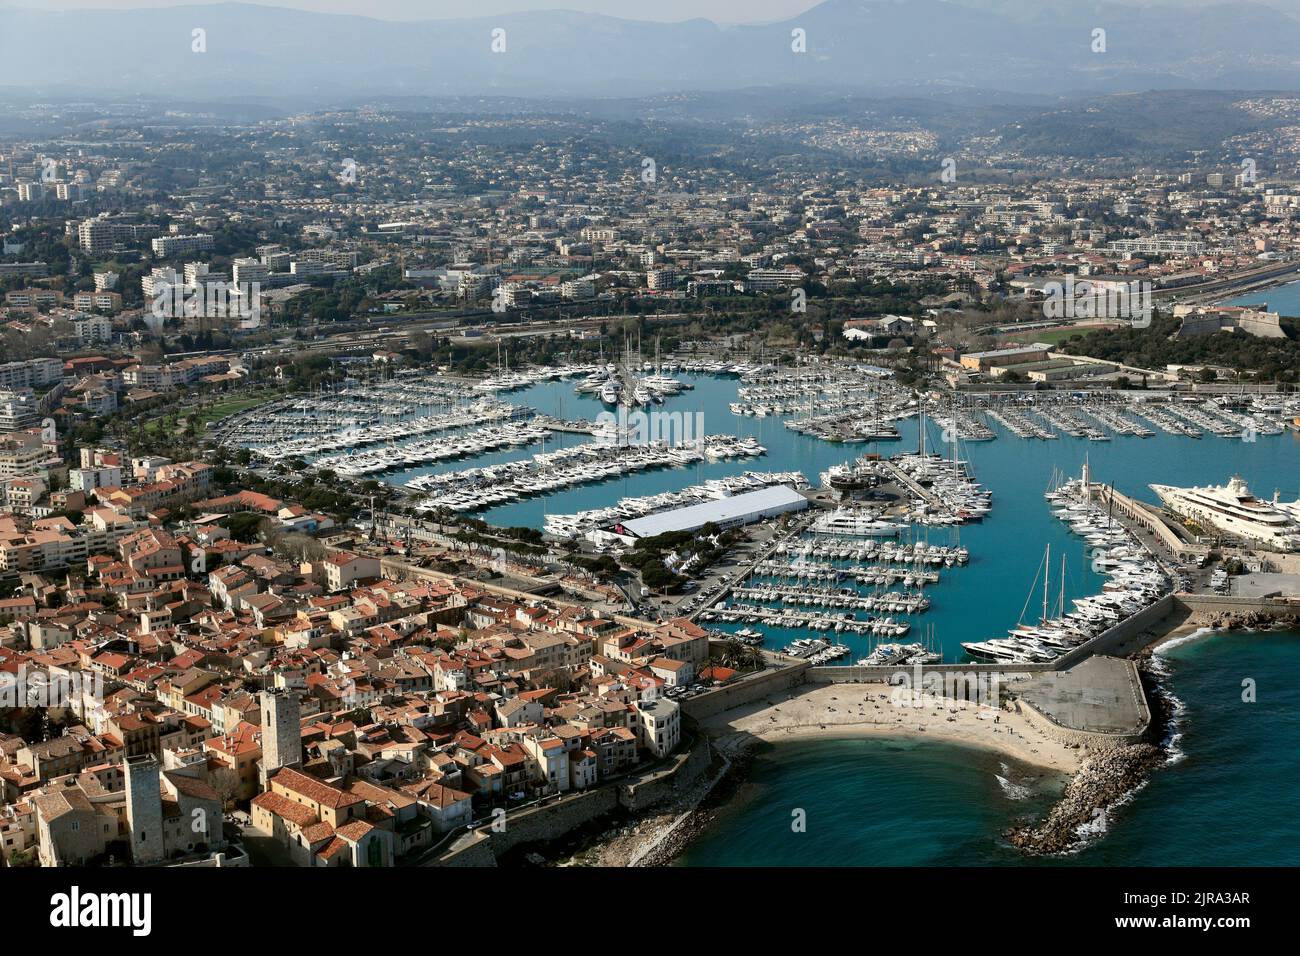 Antibes (south-eastern France): aerial view of the Port Vauban yachting harbour and the city Stock Photo